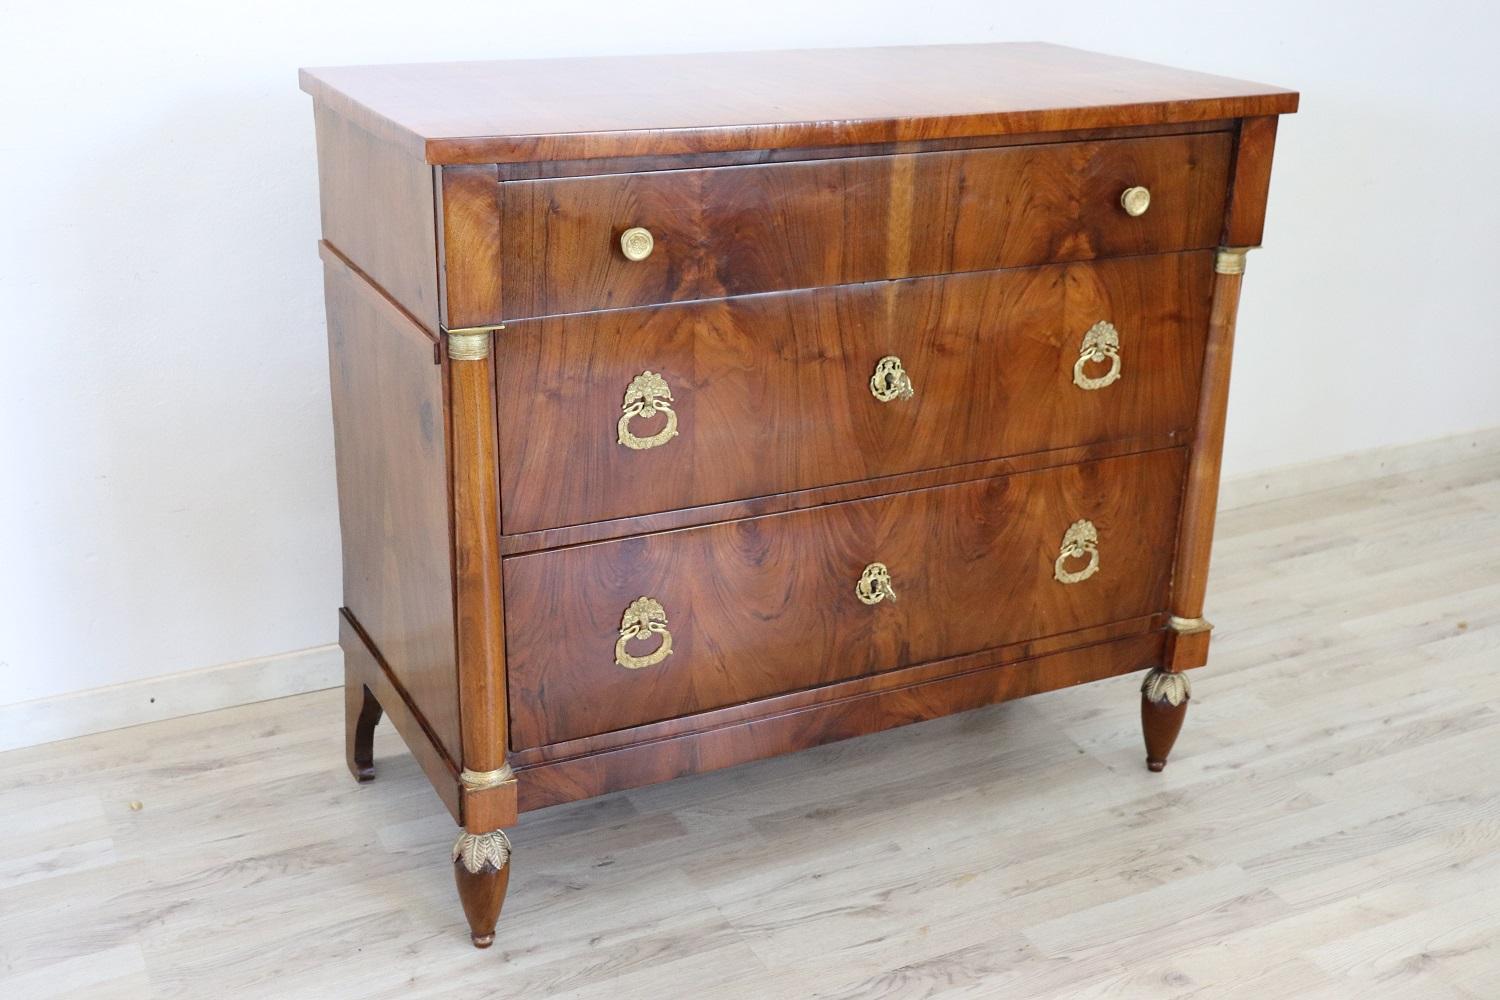 Important antique Italian chest of drawers 1800s in walnut wood. The commode is very refined linear and elegant. On the front three large drawers with two columns at the sides enriched with gilded capitals. Rich finely chiseled gilded bronzes. Very